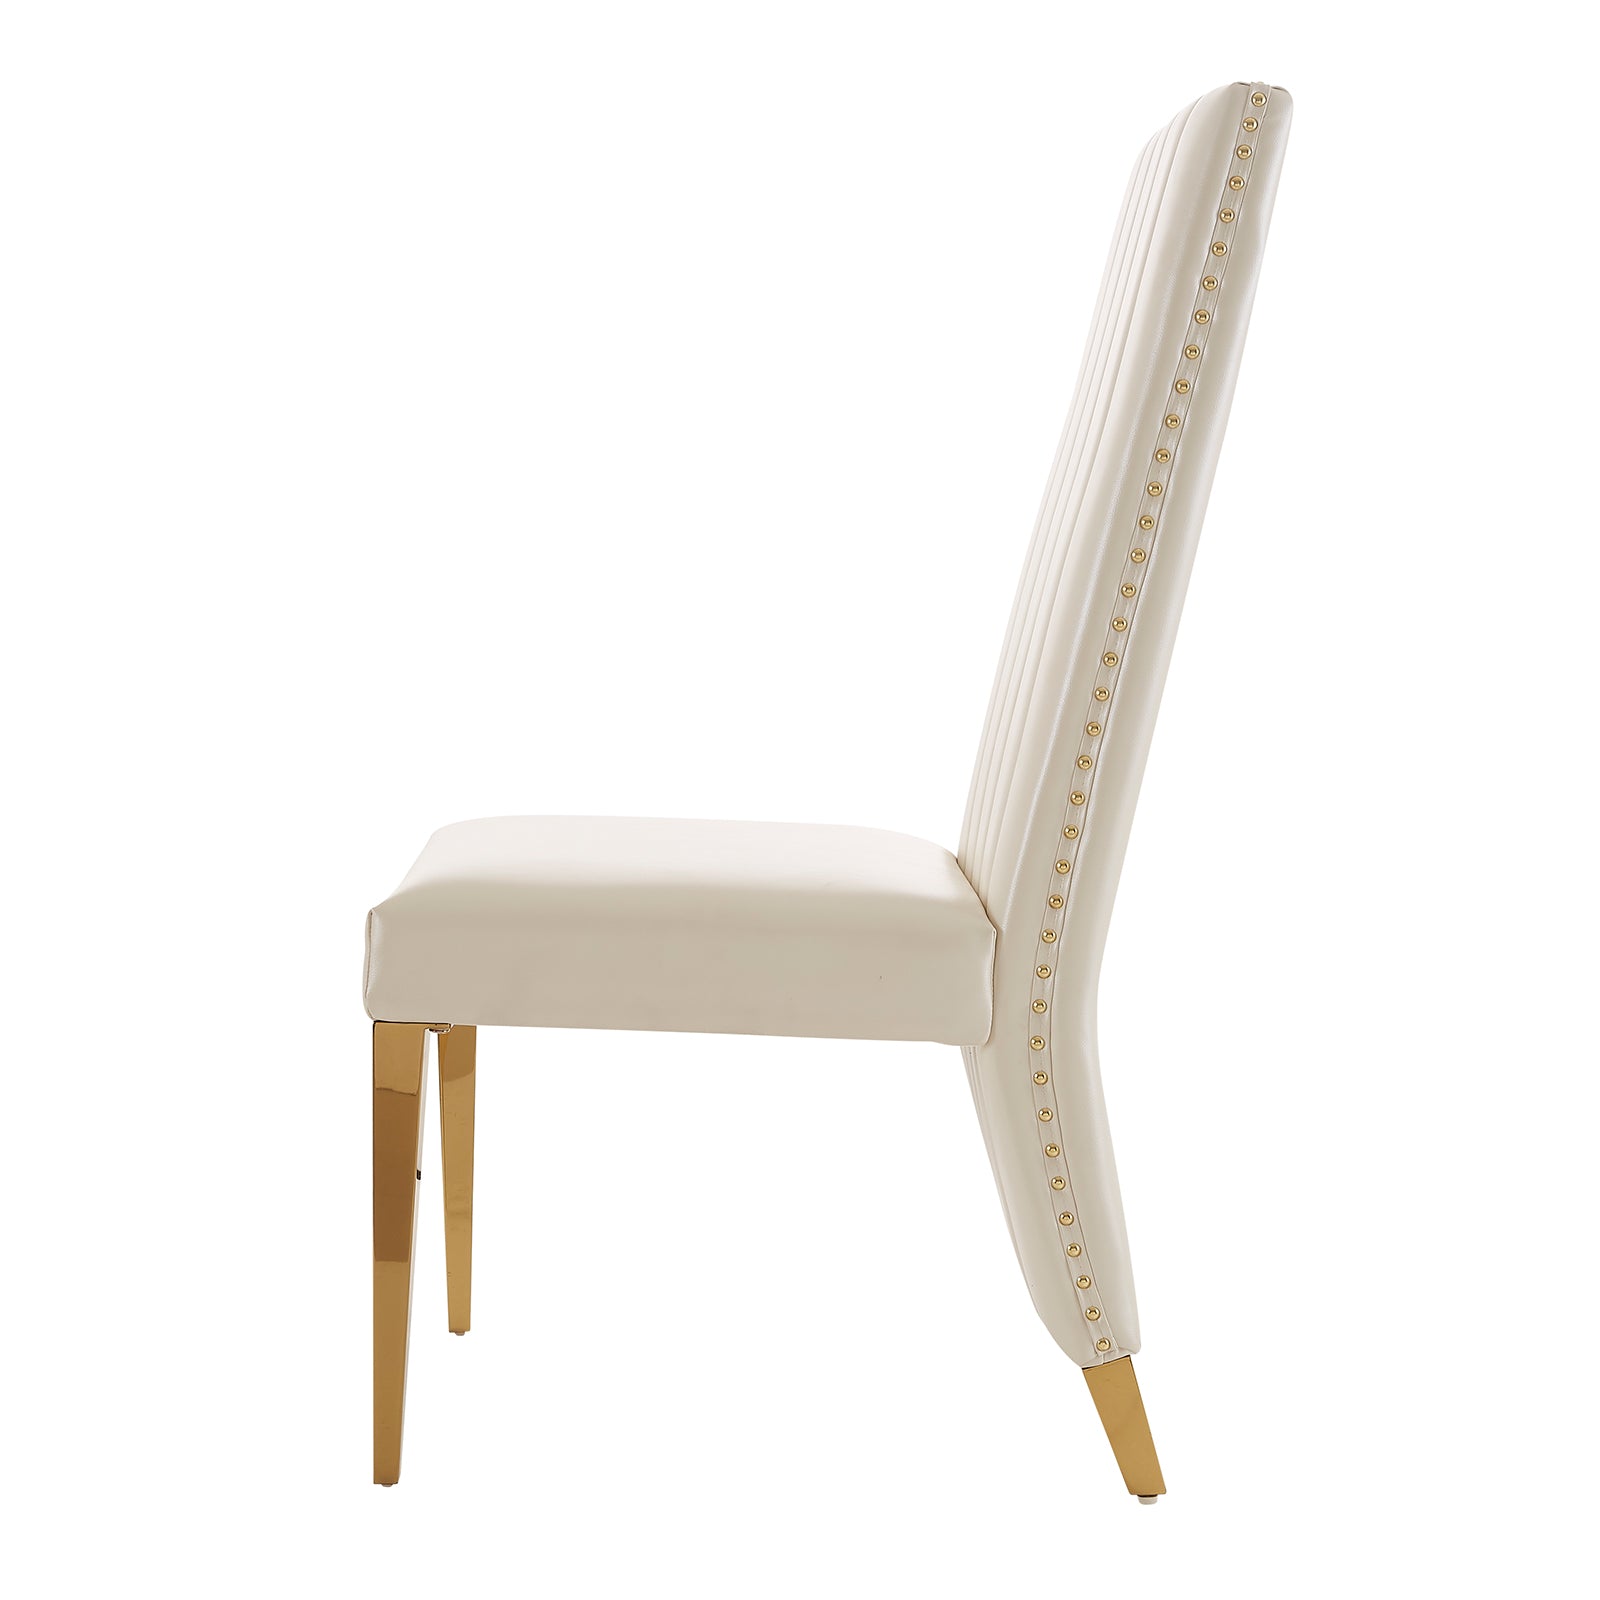 720 Set | AUZ White and Gold Dining room Sets for 6